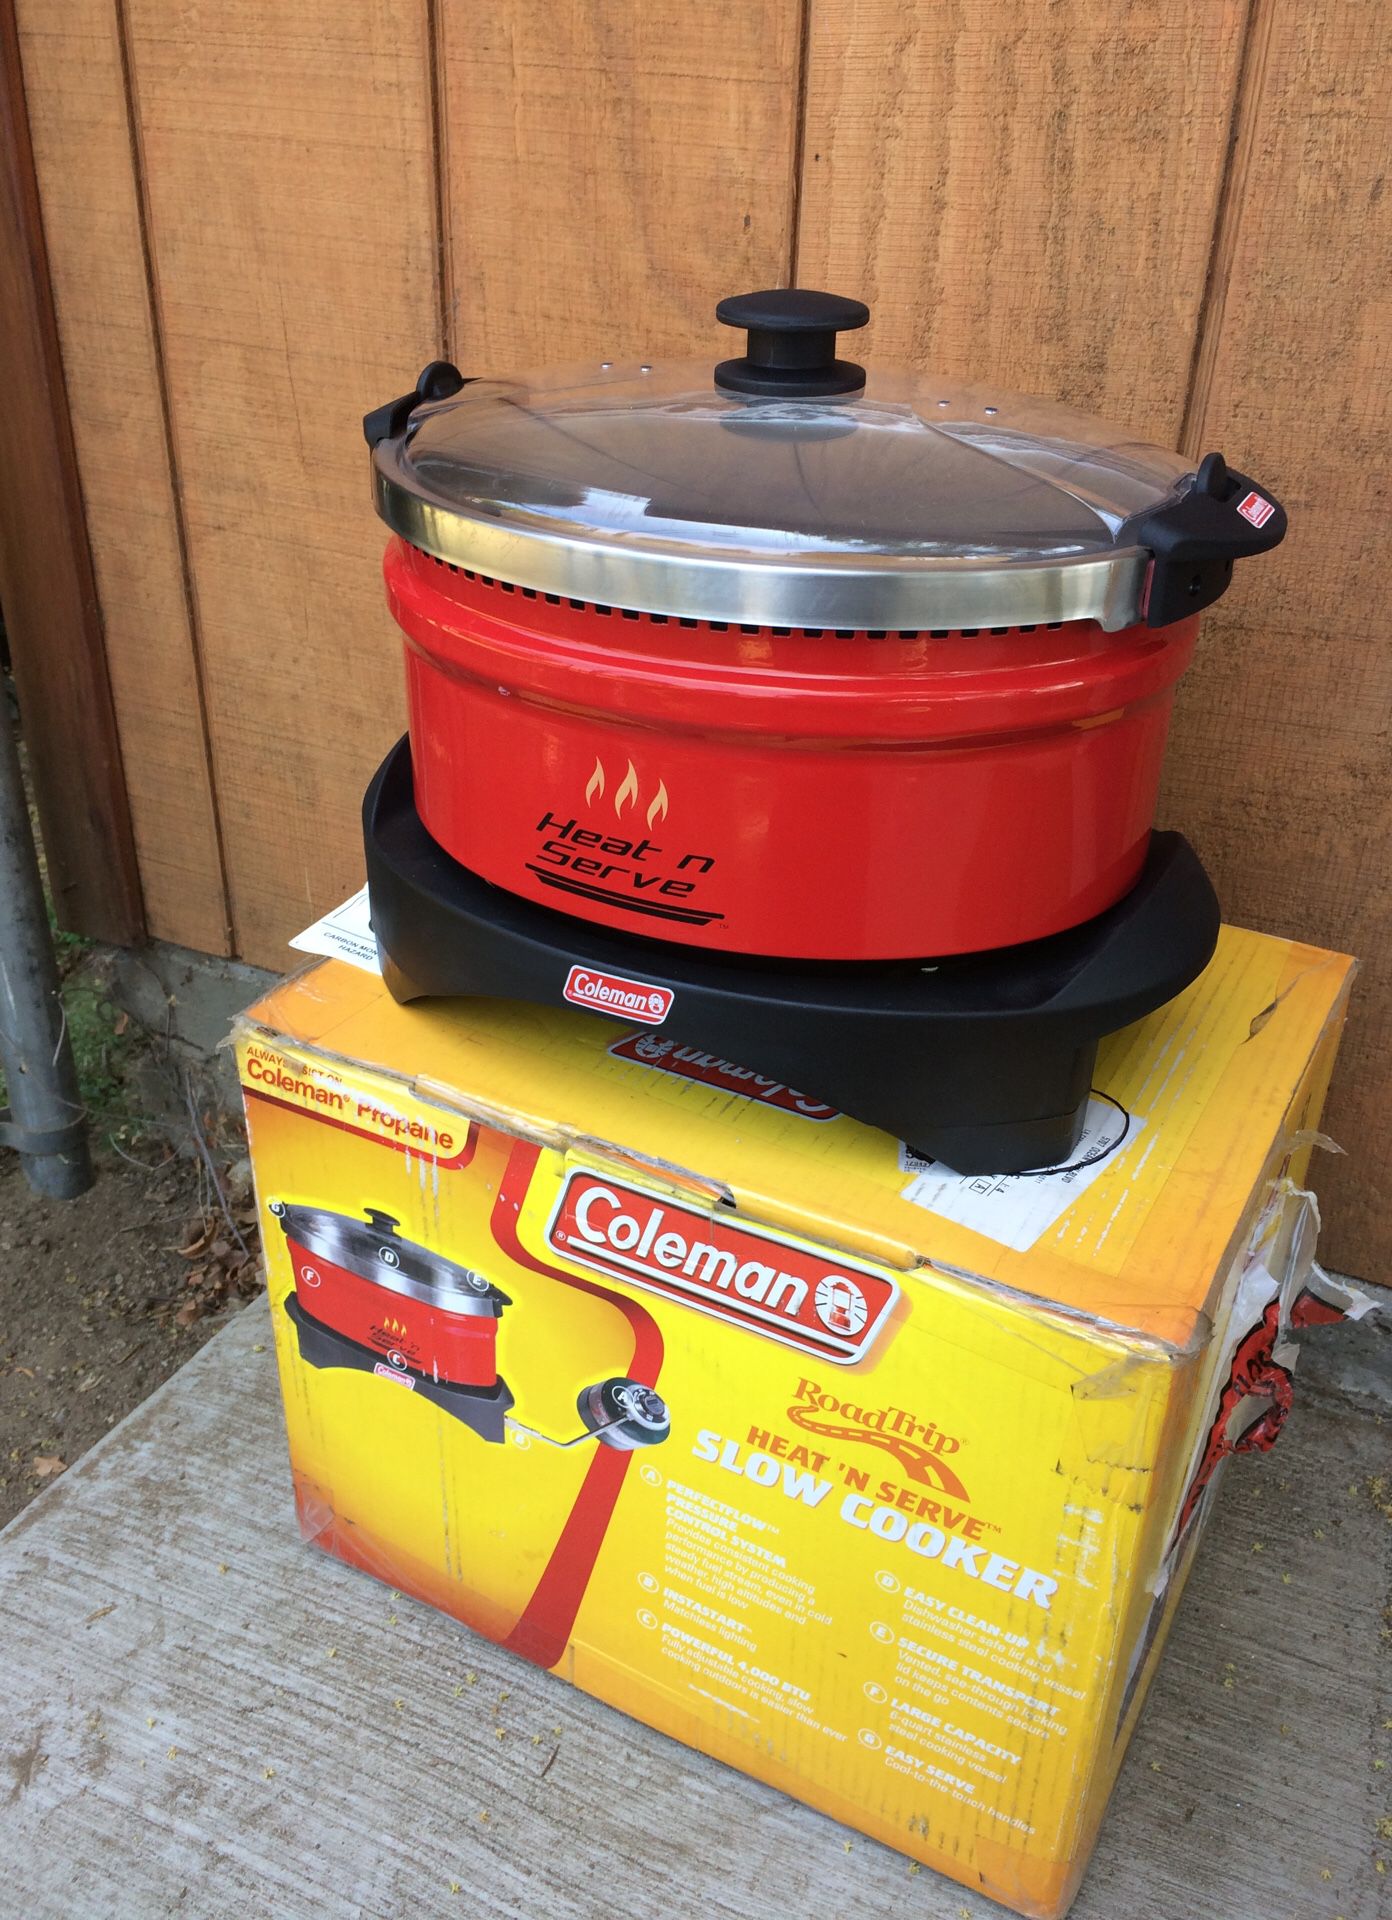 Crock-Pot Little Dipper . New 4.00 for Sale in Pinon Hills, CA - OfferUp